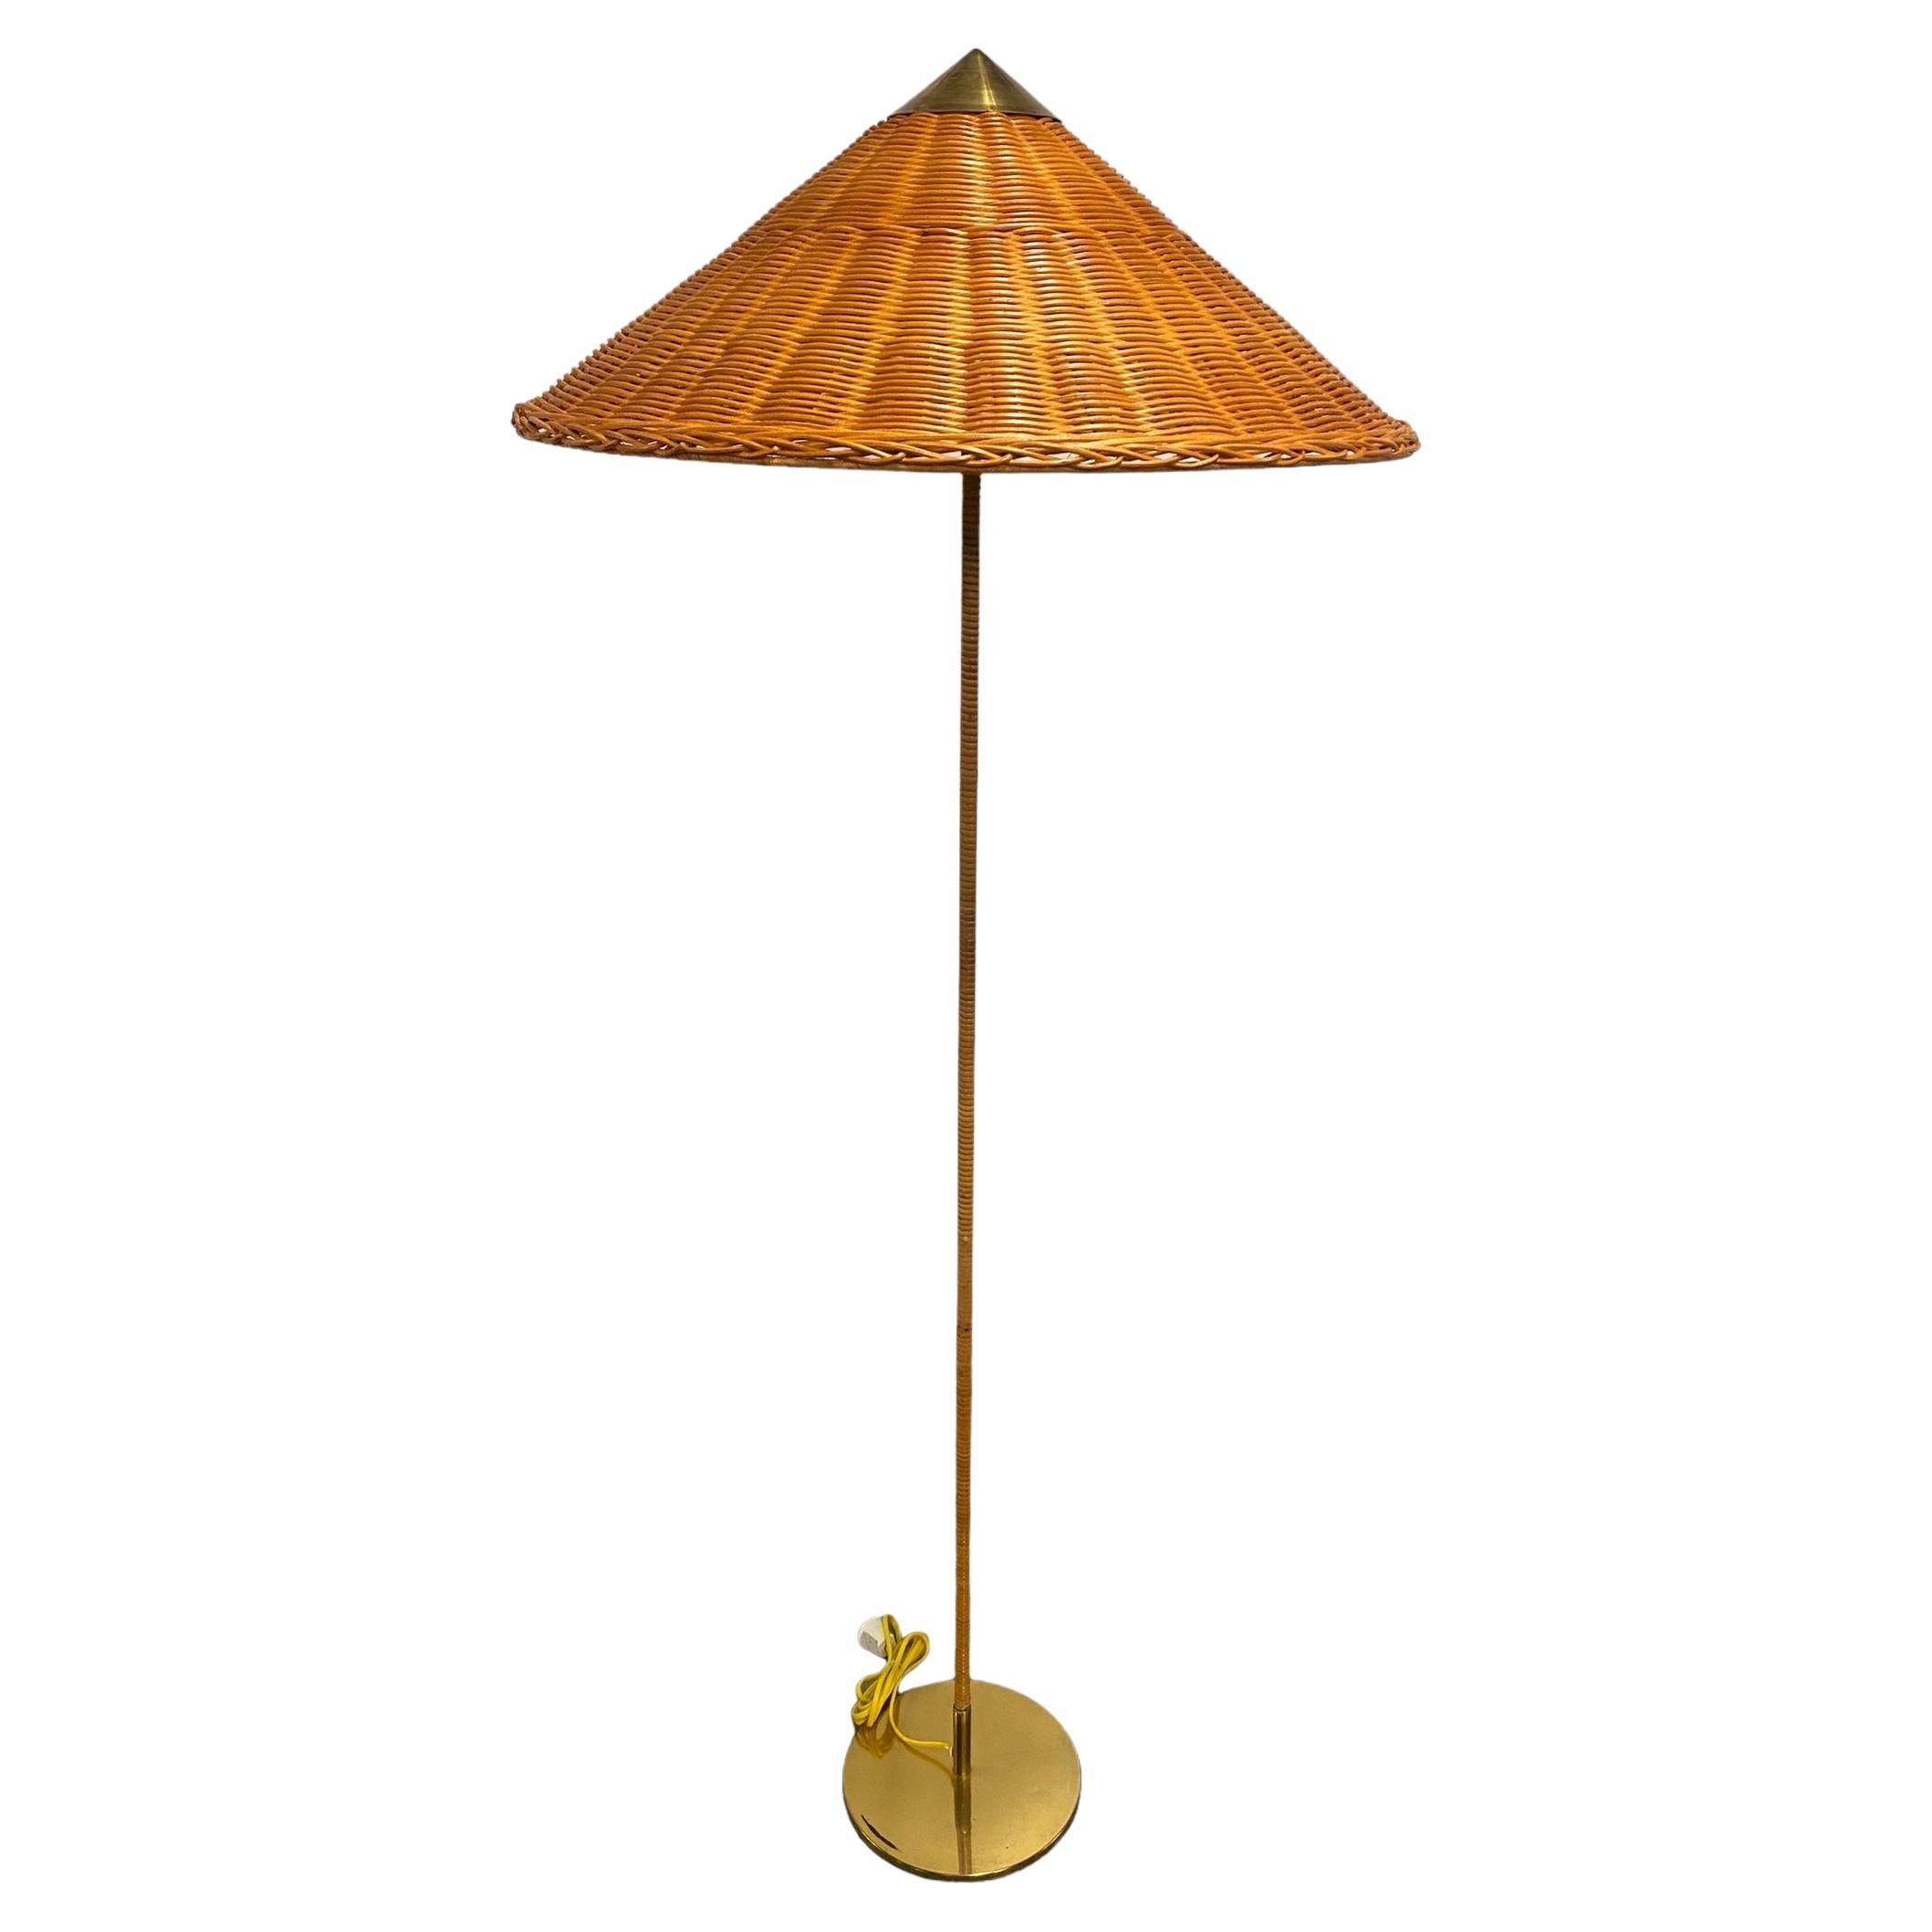 Paavo Tynell "Chinese Hat" Floor Lamp 9602, Taito 1940s For Sale